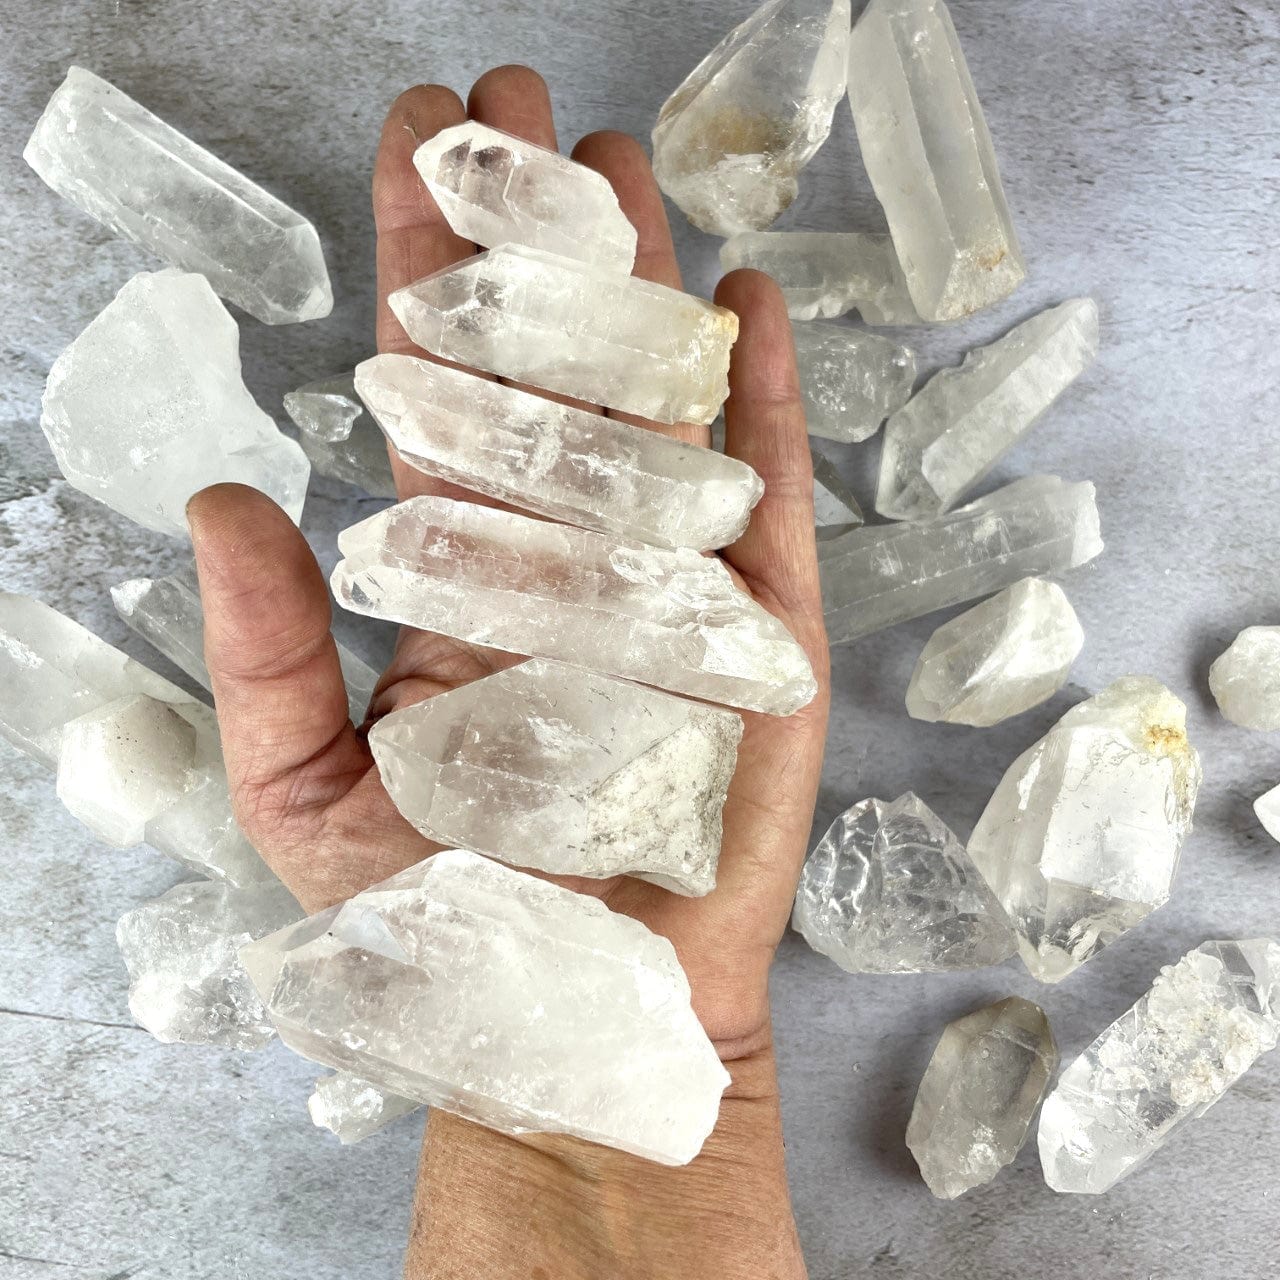 Crystal Quartz Points on a table and in a hand for size reference